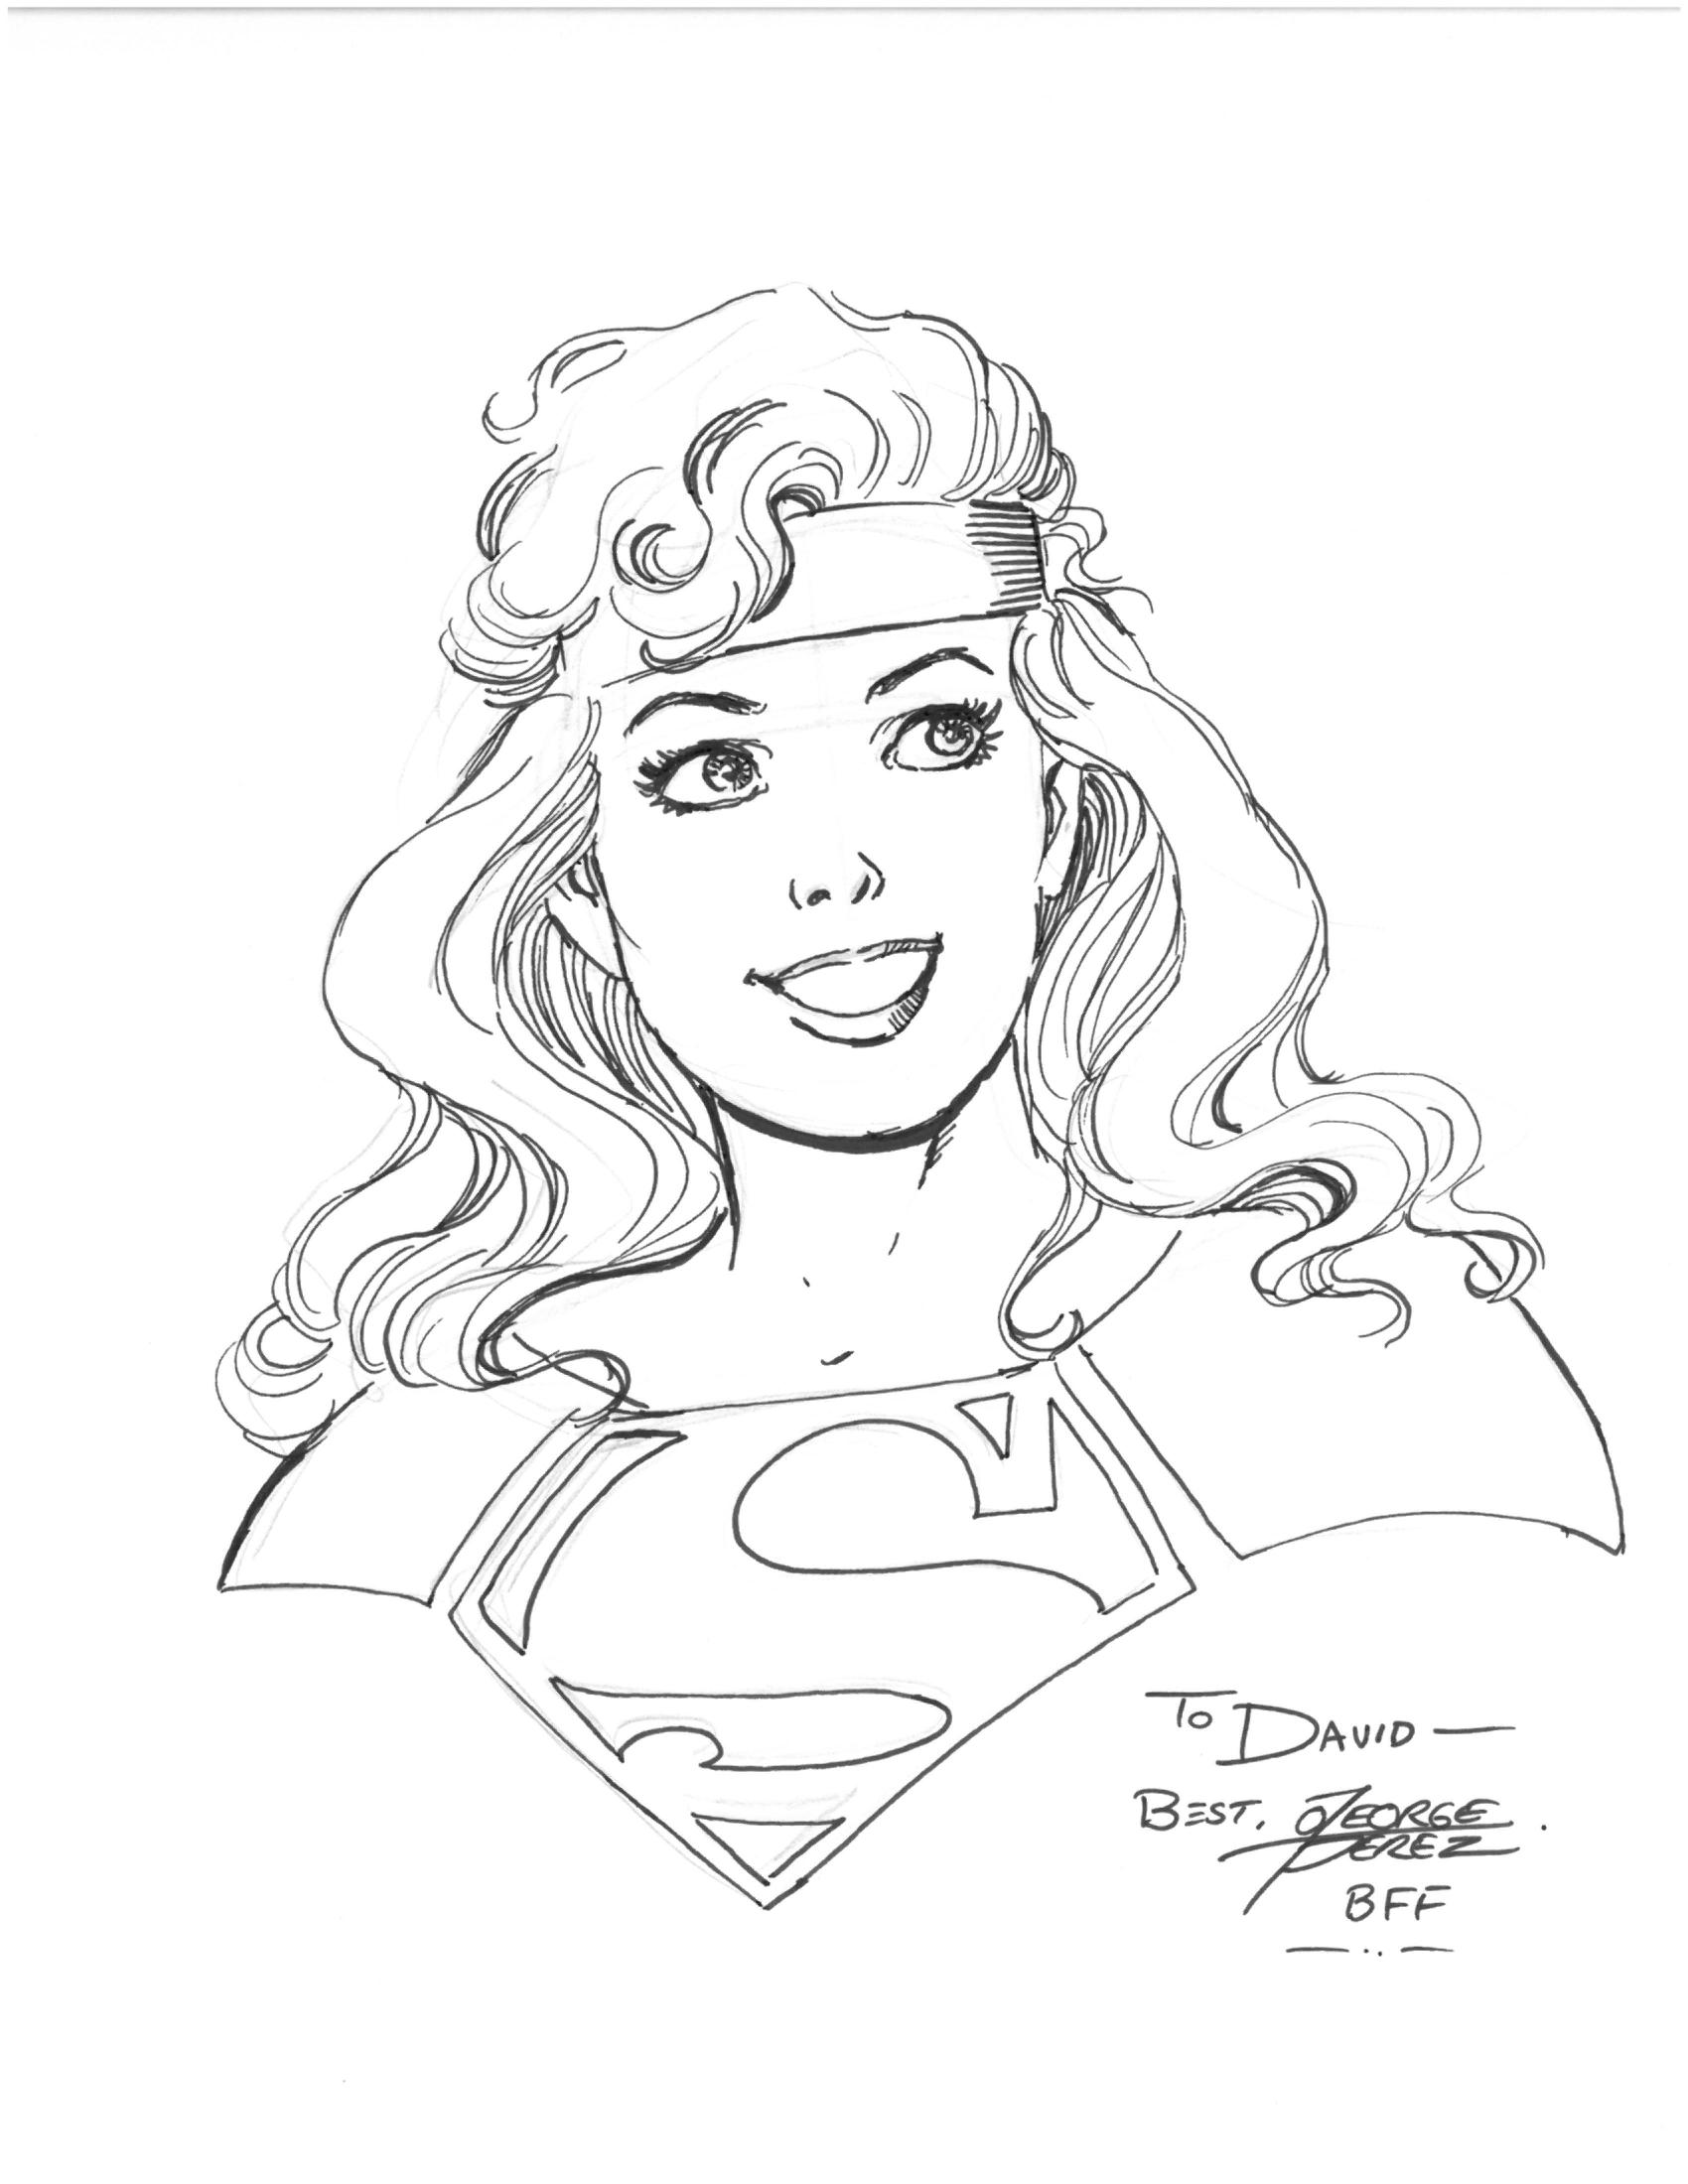 Supergirl-by-George-Perez-2010